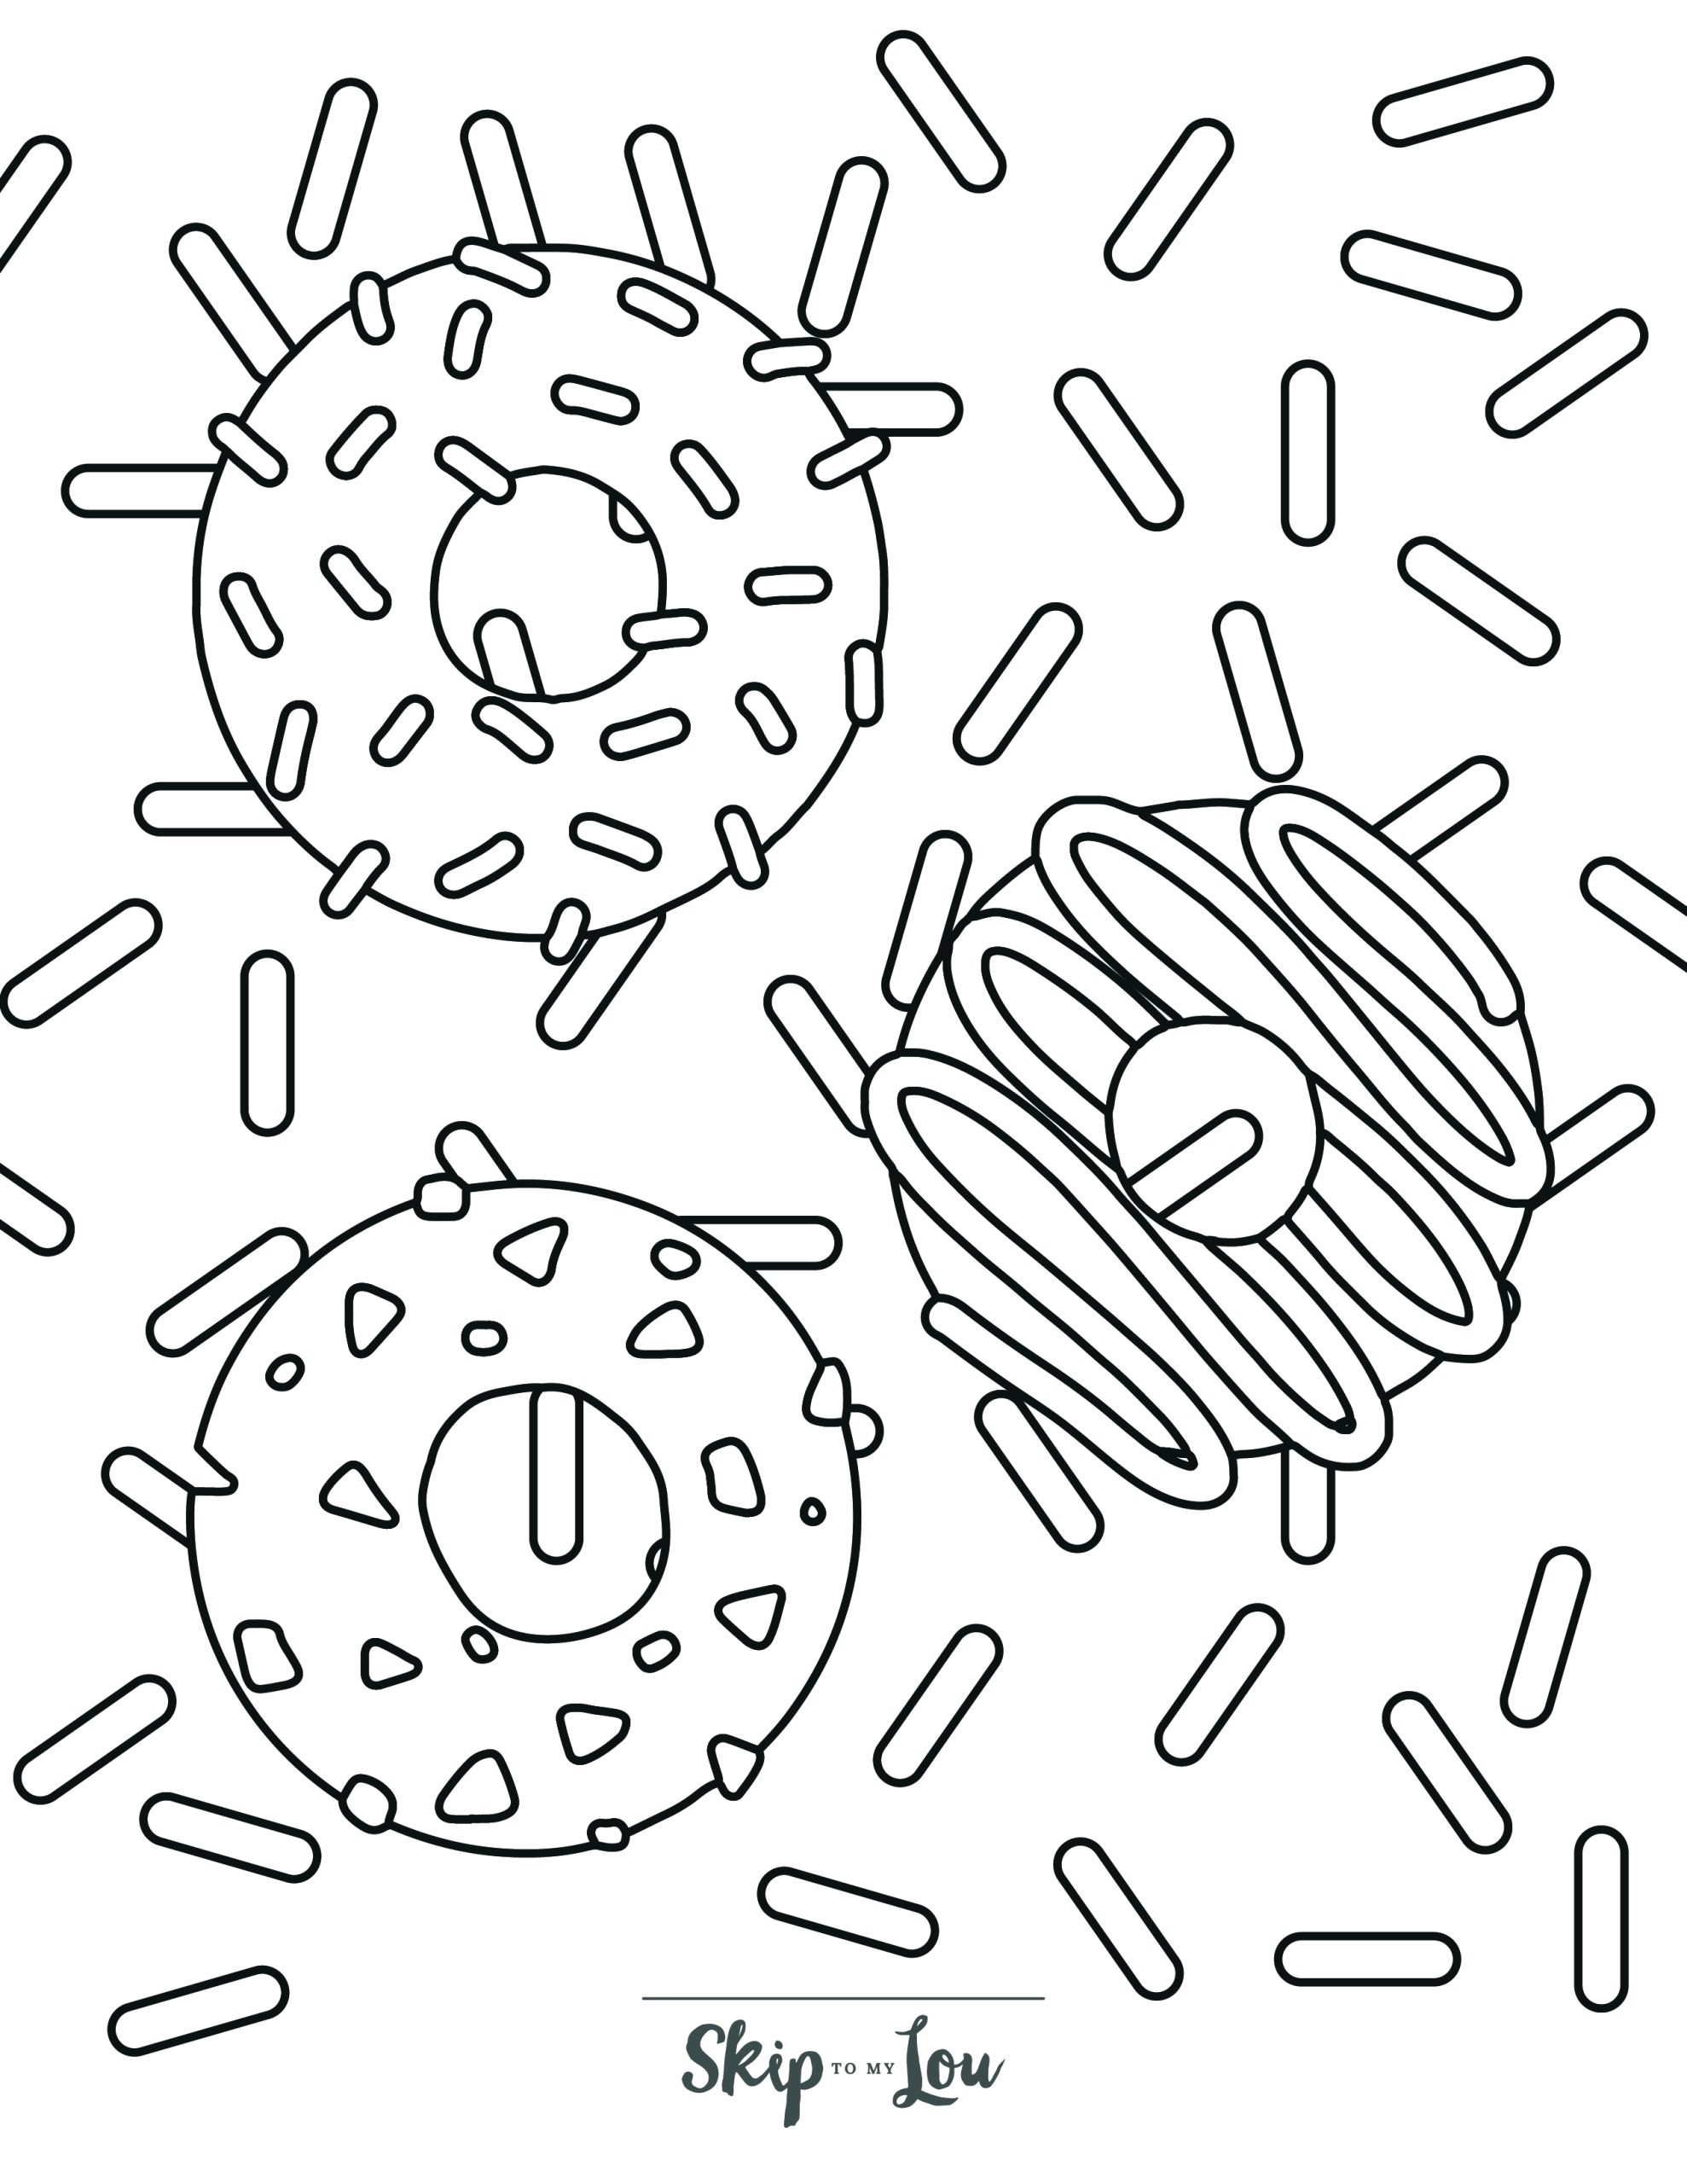 Fun donut coloring pages with free printable book skip to my lou